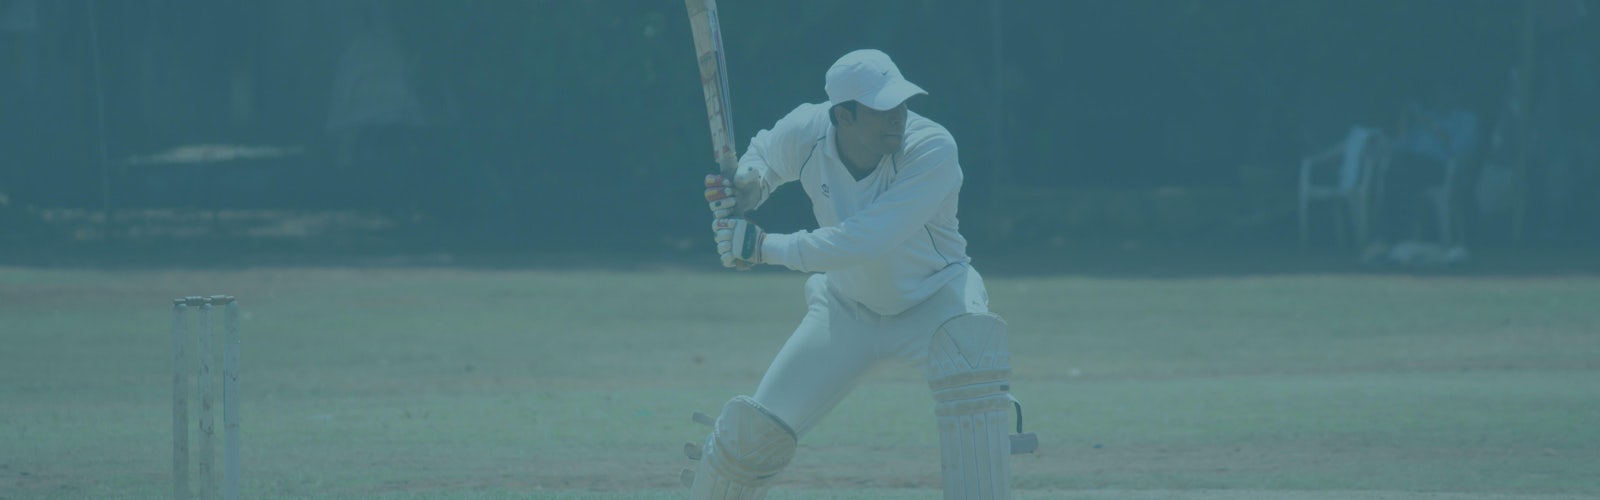 Cricket Betting Sites Cover Image